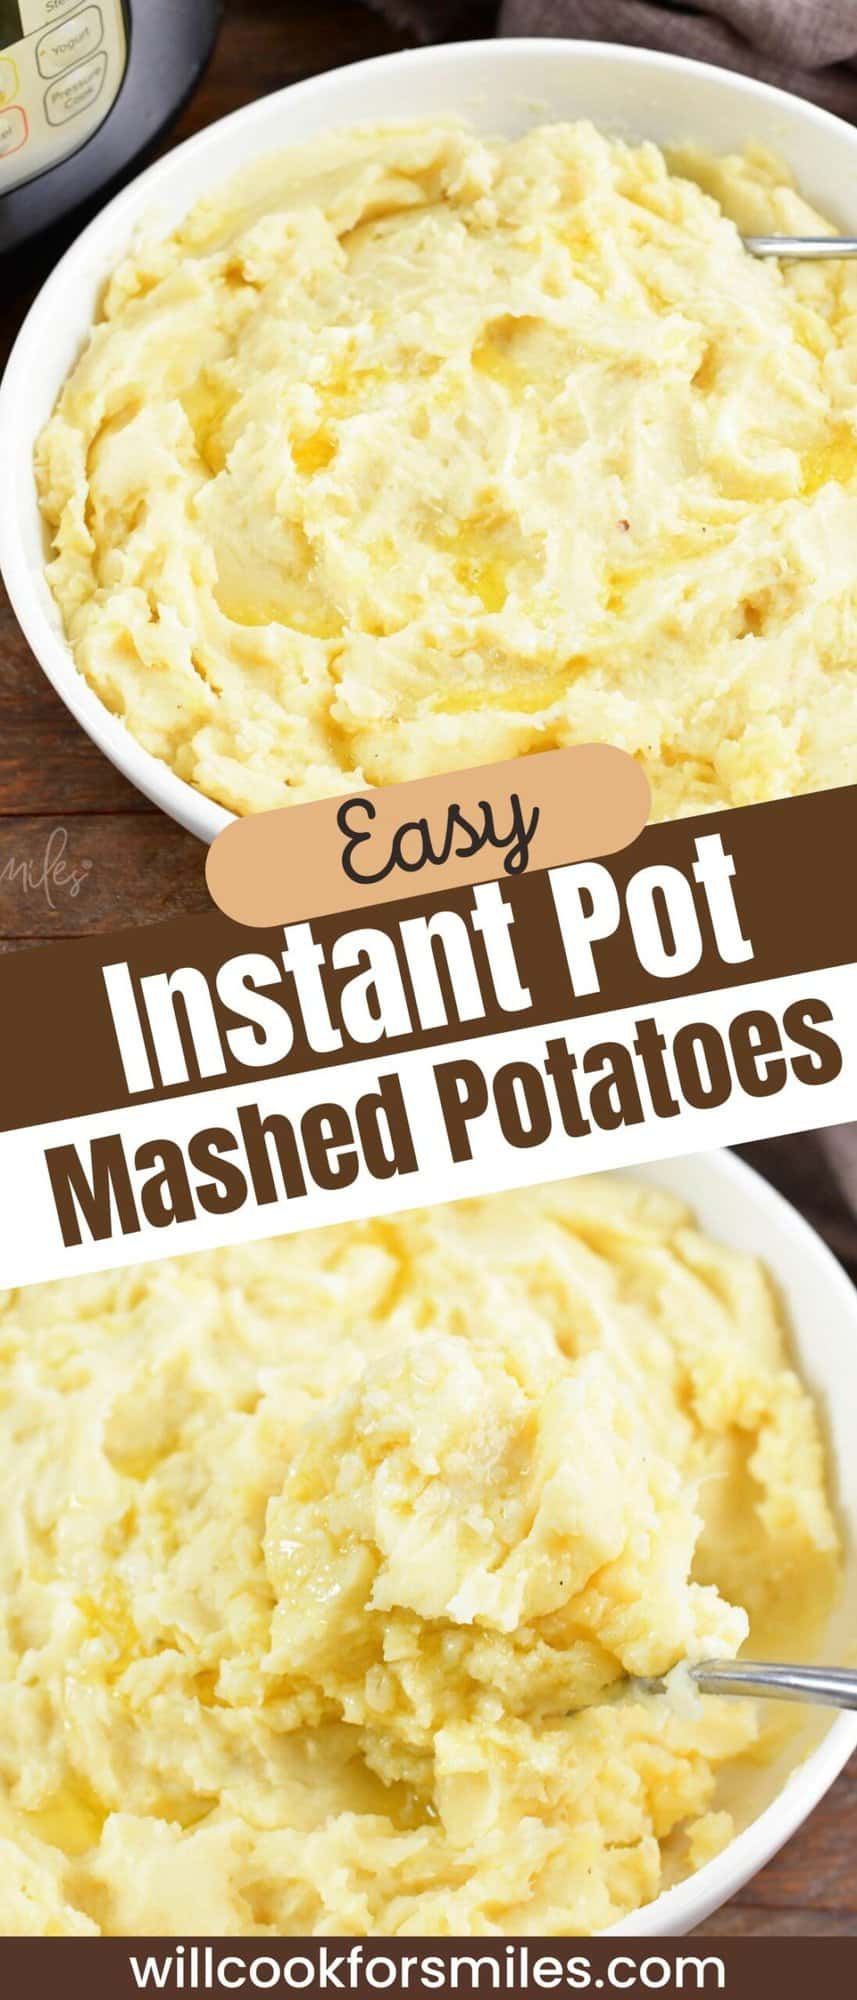 collage of two images of mashed potatoes and title.